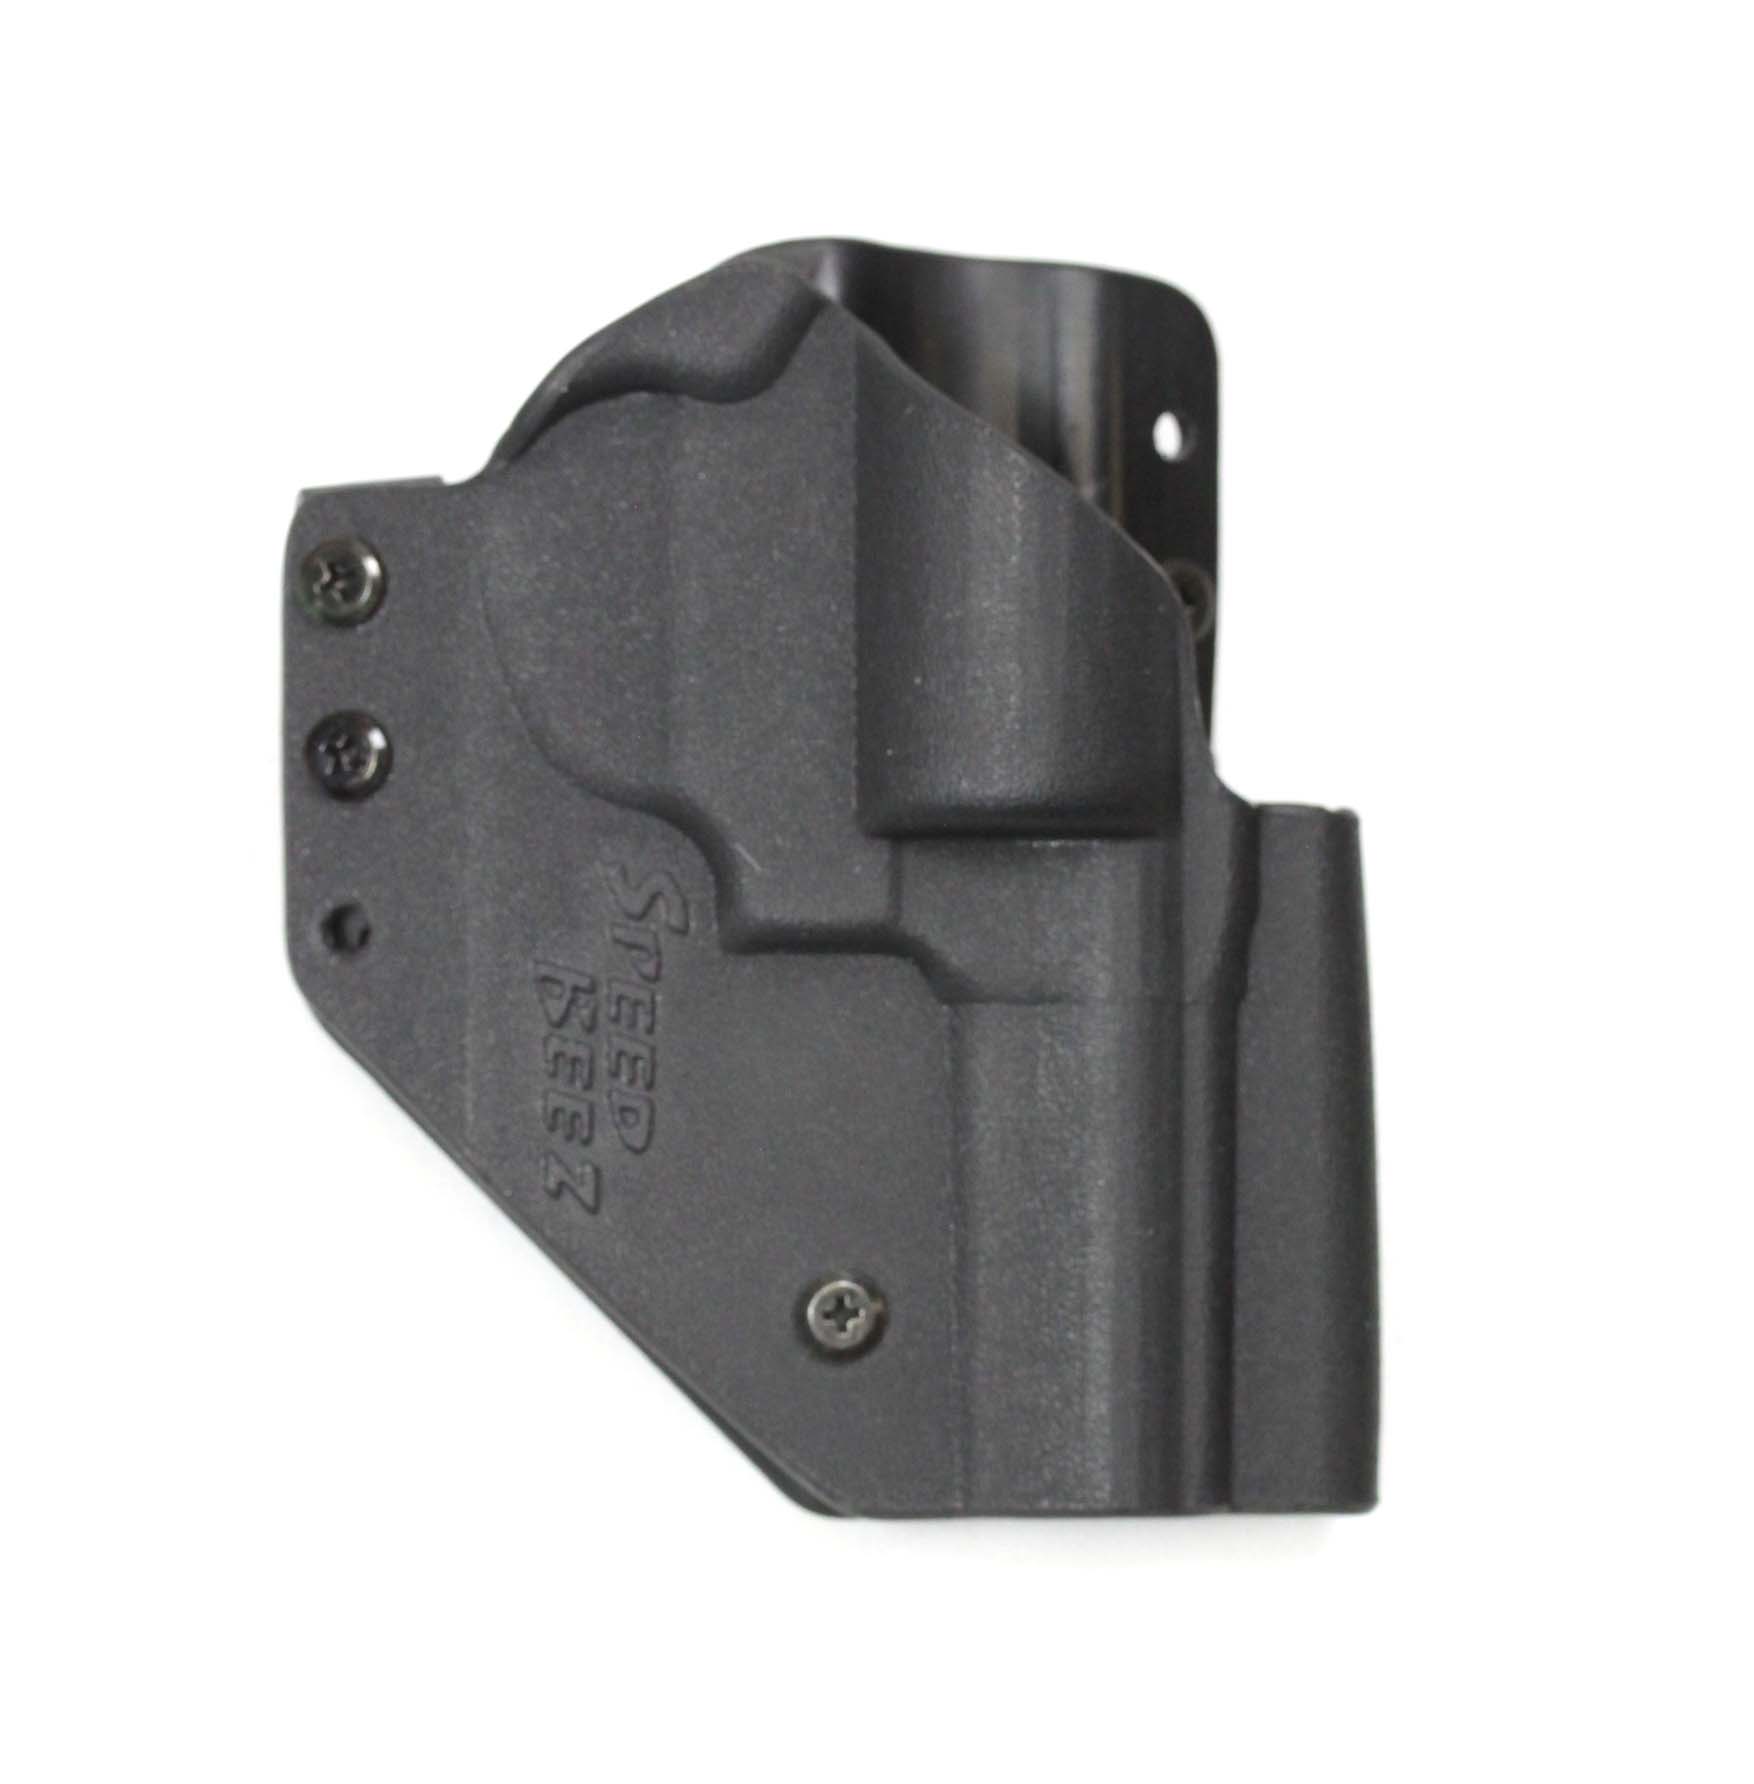 SPEED BEEZ® Leather Pancake Style Revolver Holster OWB Concealment (BLACK)